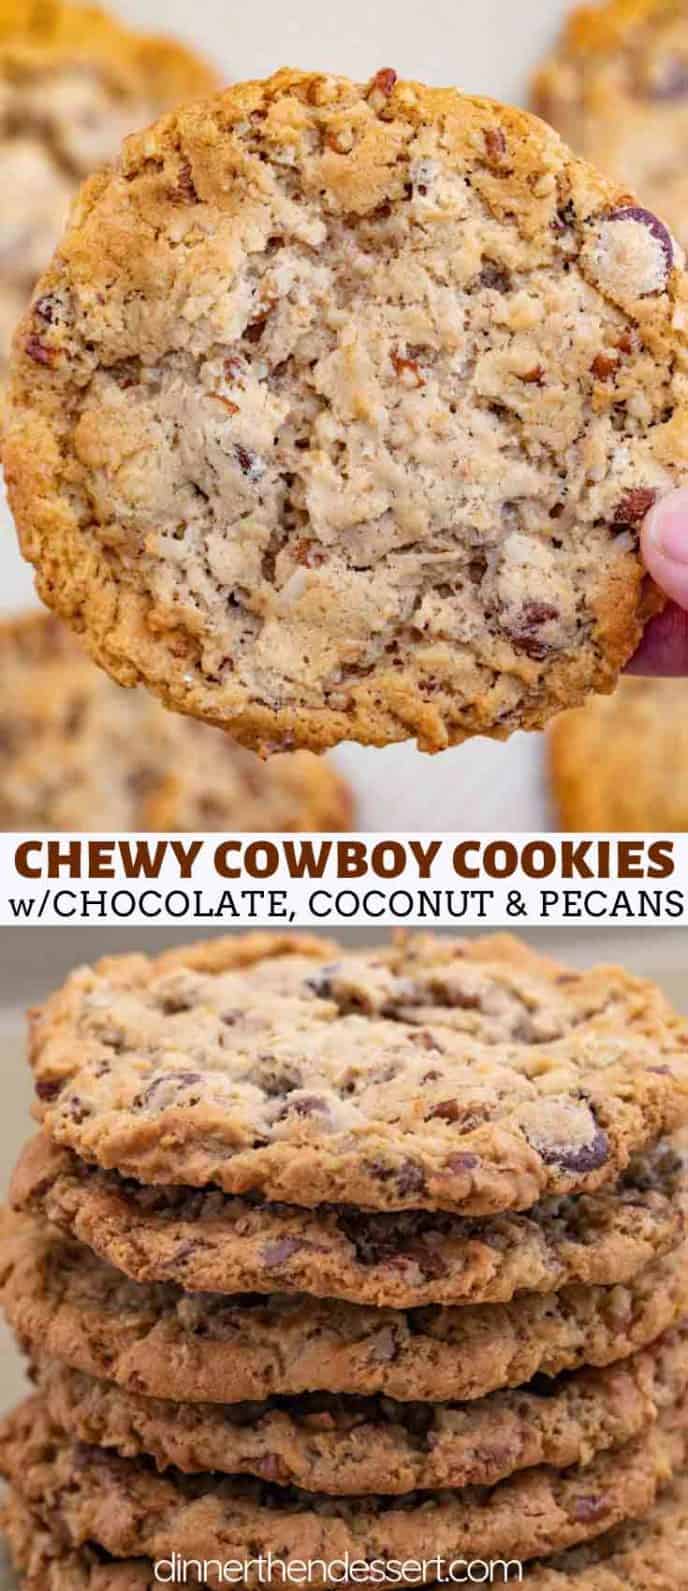 Cowboy Cookies with coconut chocolate and pecans